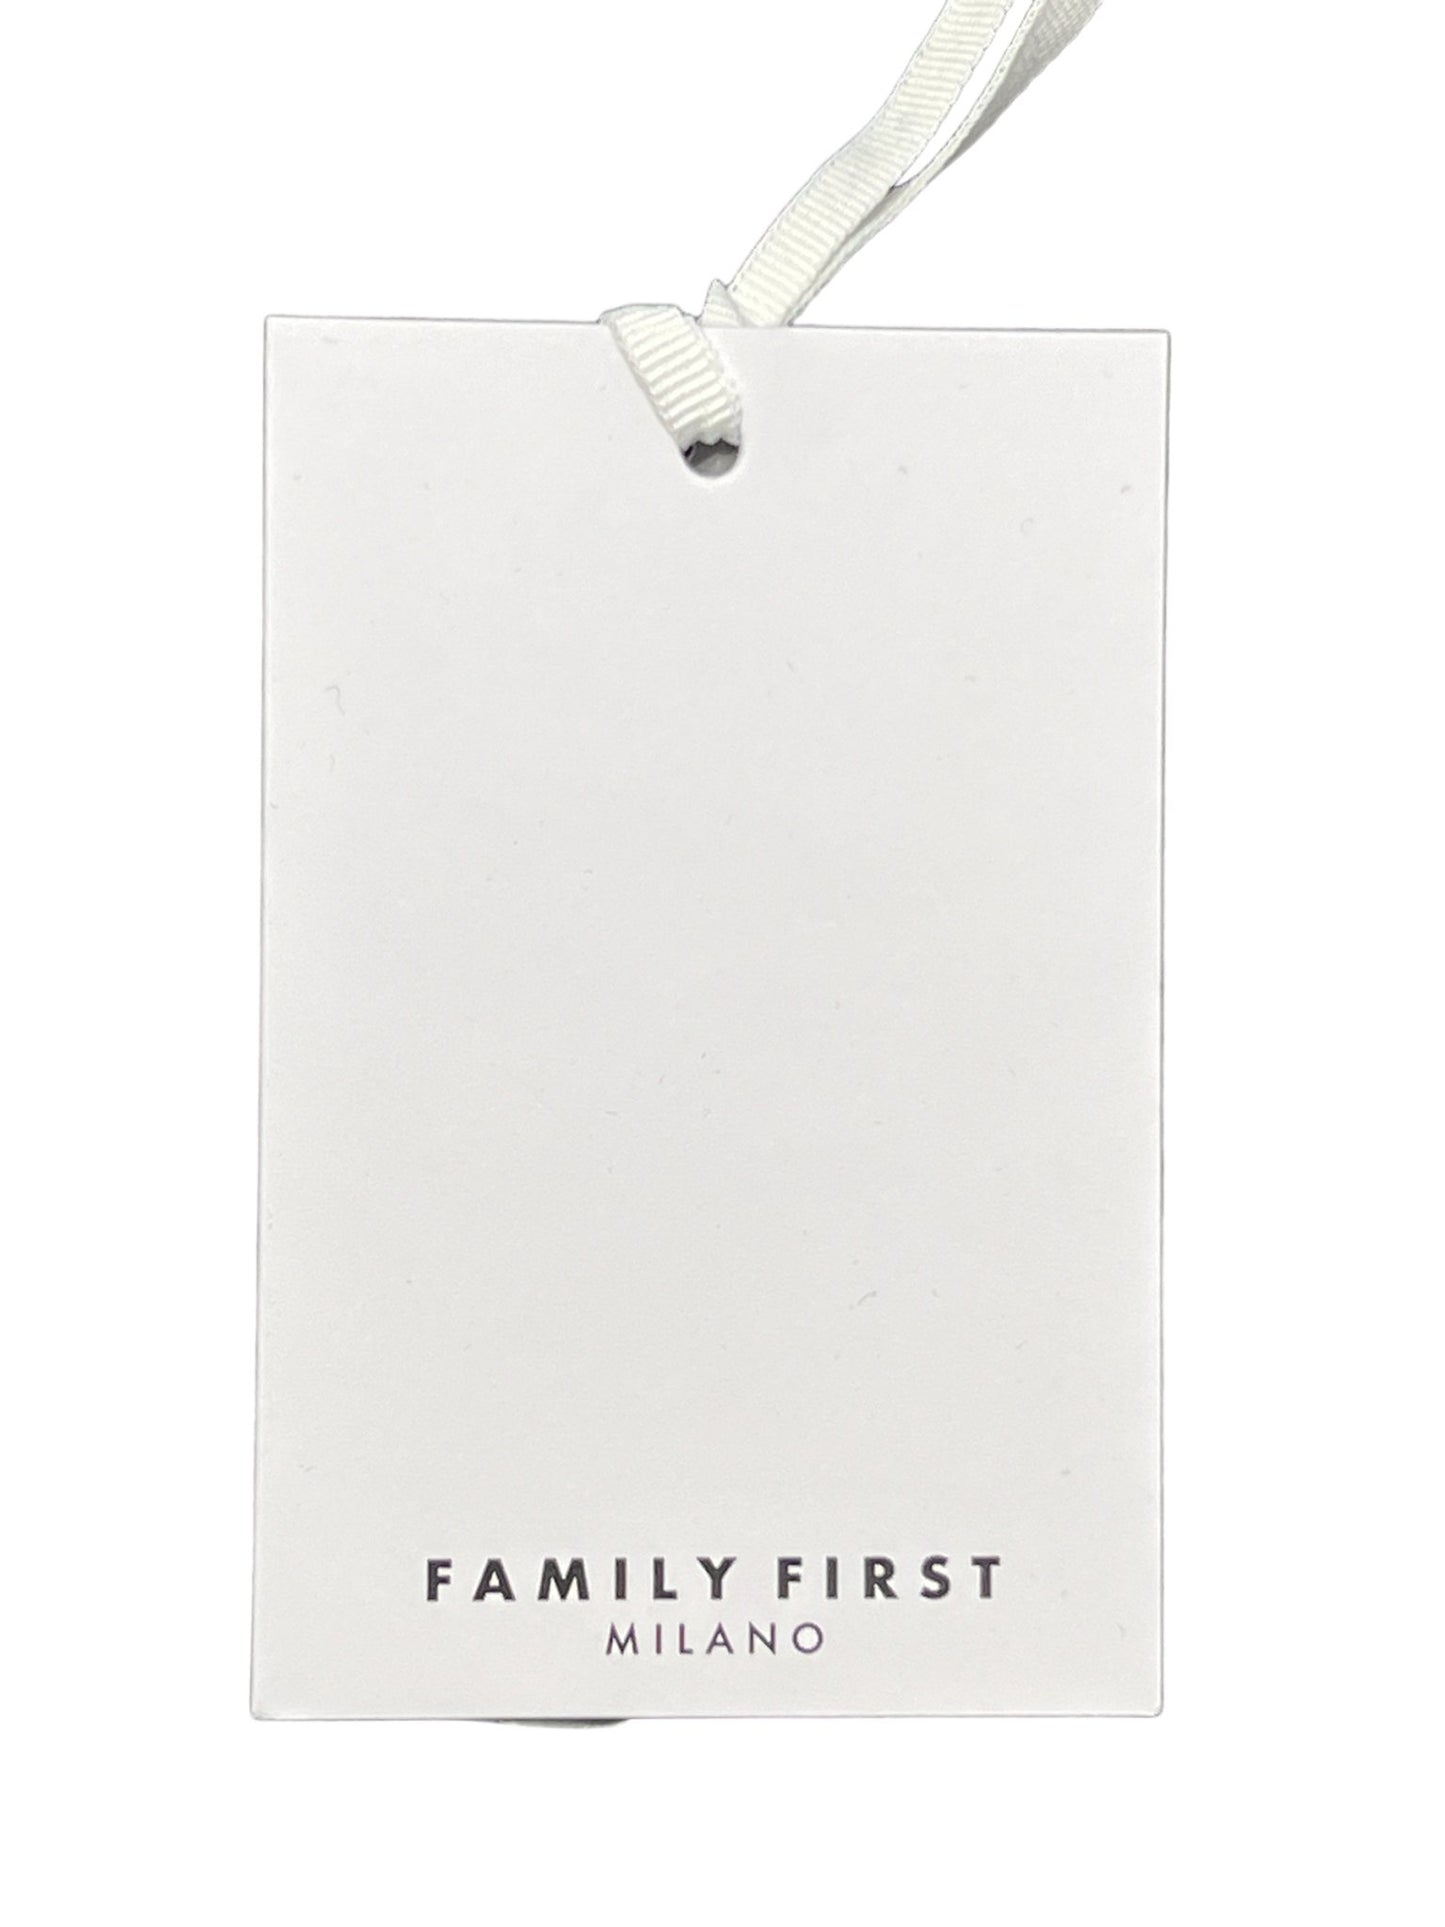 A white tag with the text "FAMILY FIRST SWS2405 HOODIE JAQUARD DB" printed at the bottom, attached with a white ribbon, set against a black background.